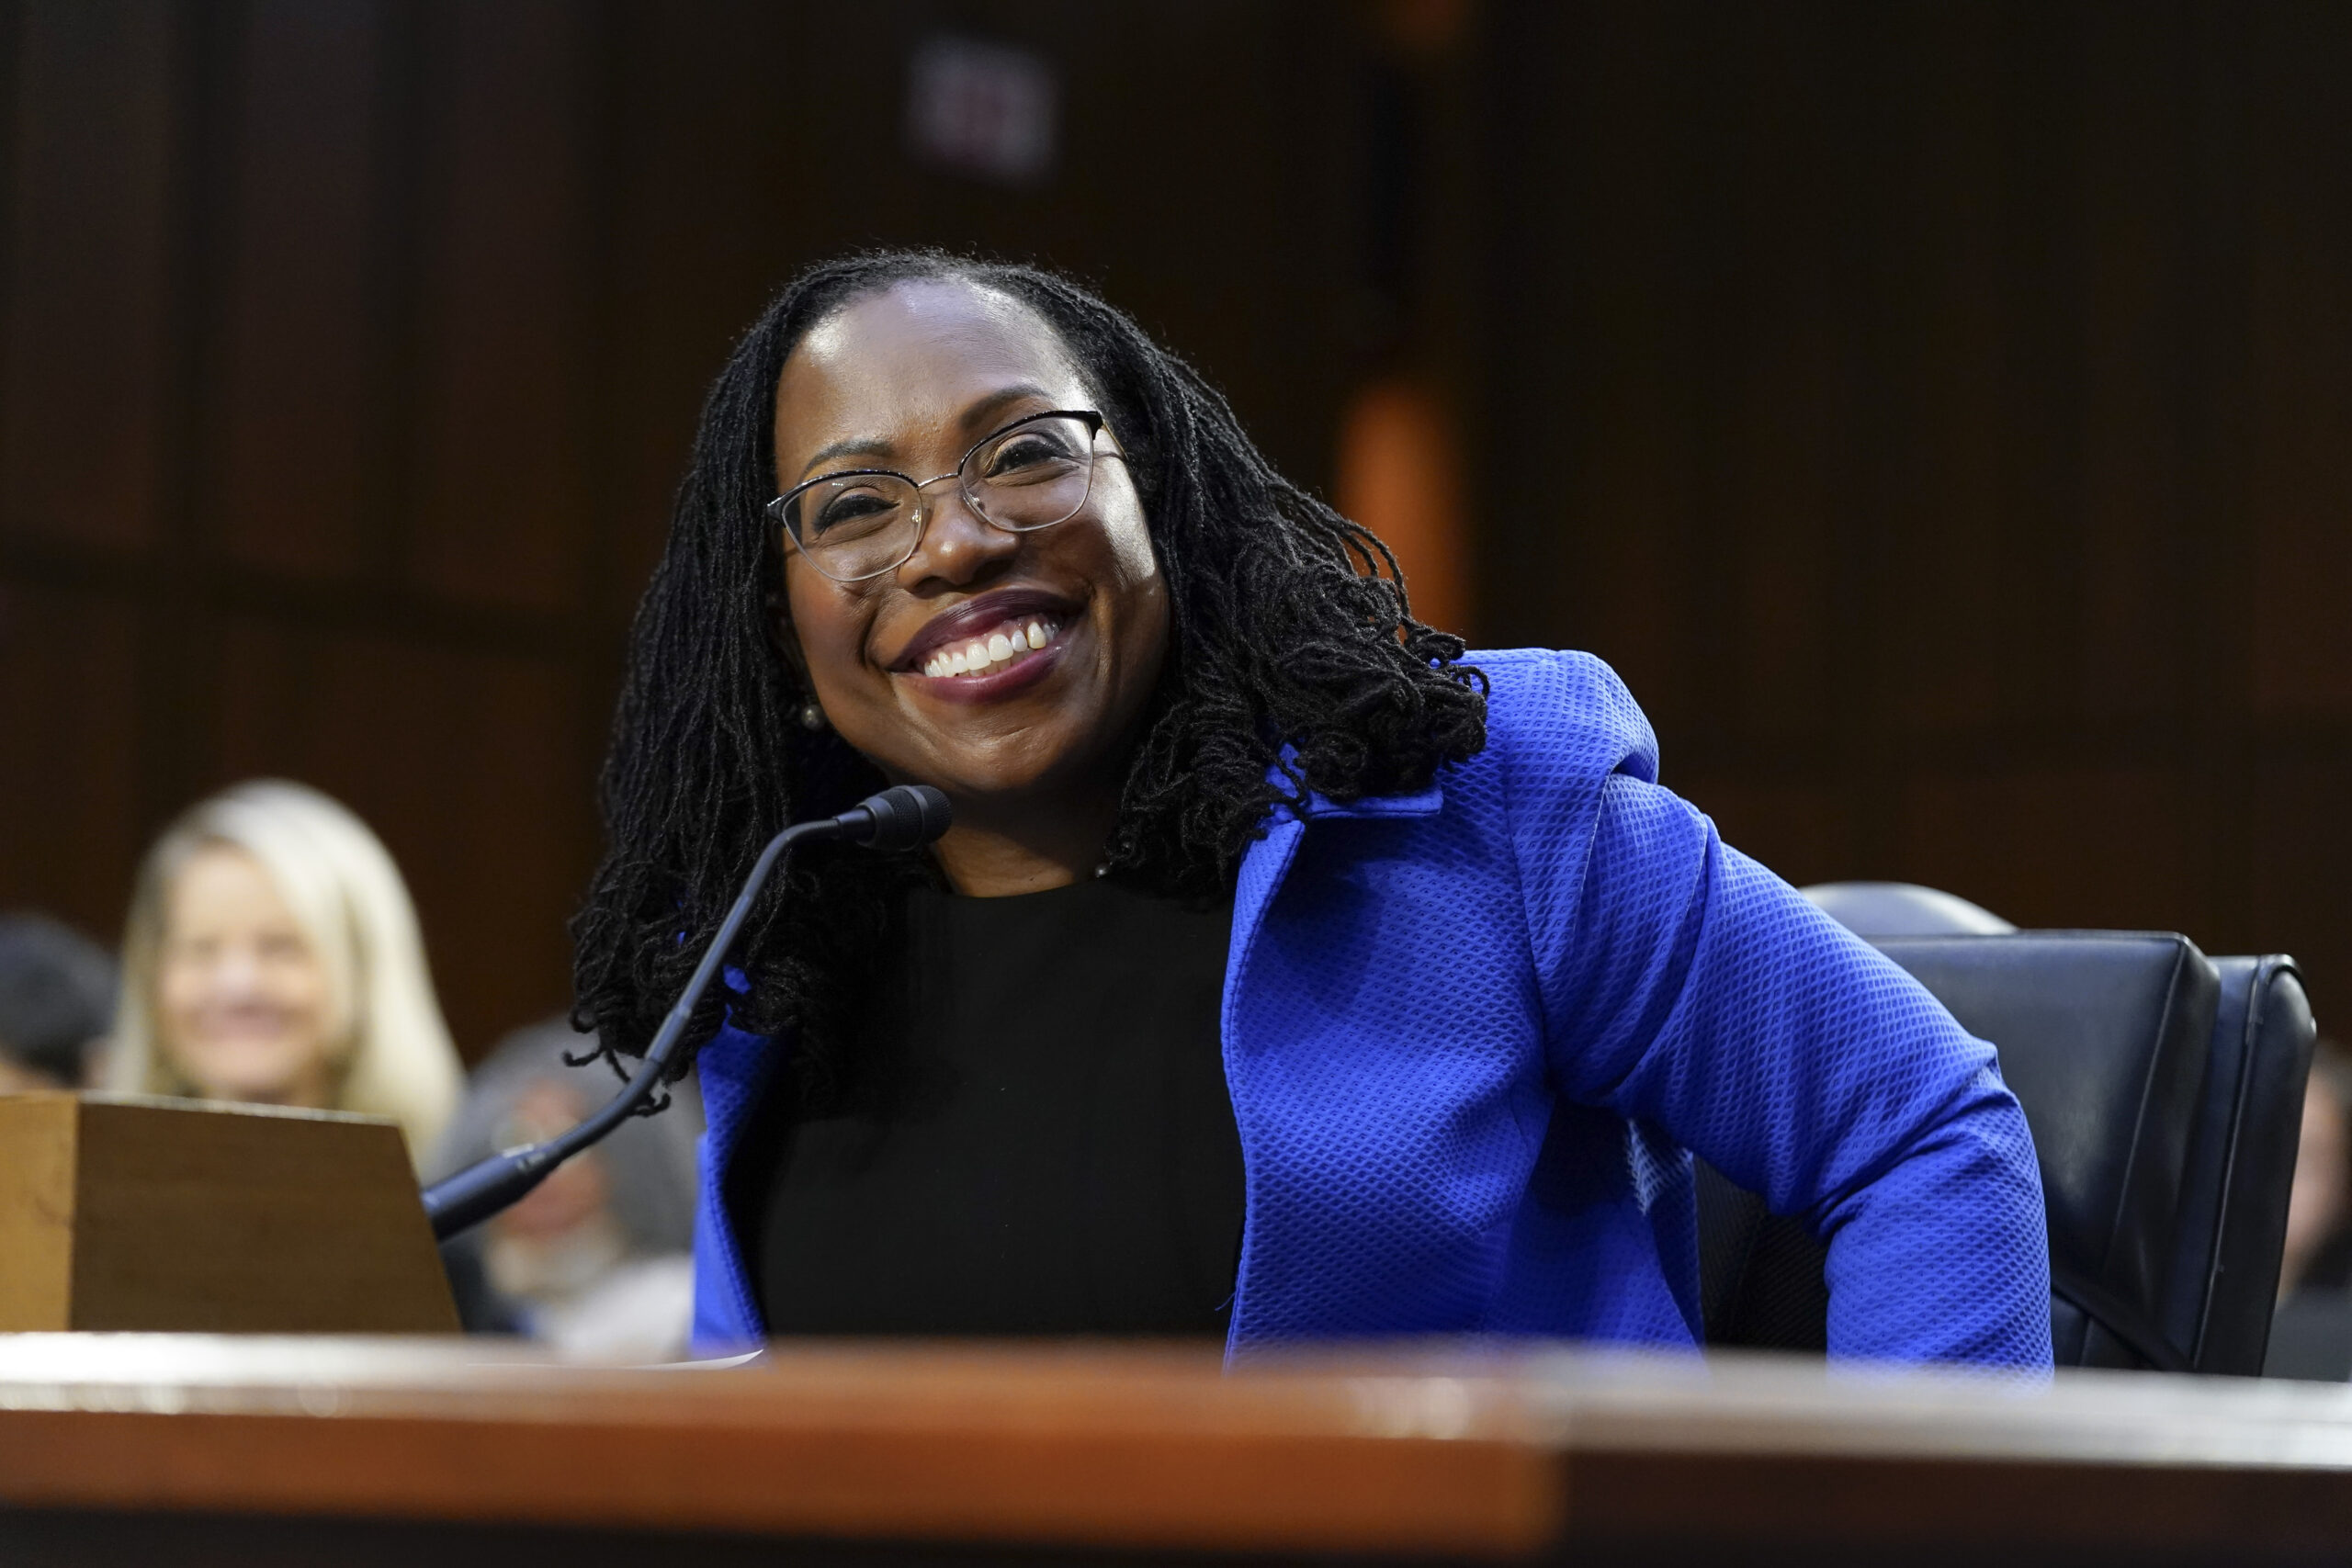 Supreme Court nominee Ketanji Brown Jackson testifies during her Senate Judiciary Committee confirmation hearing on Capitol Hill in Washington, Wednesday, March 23, 2022. (AP Photo/Andrew Harnik)